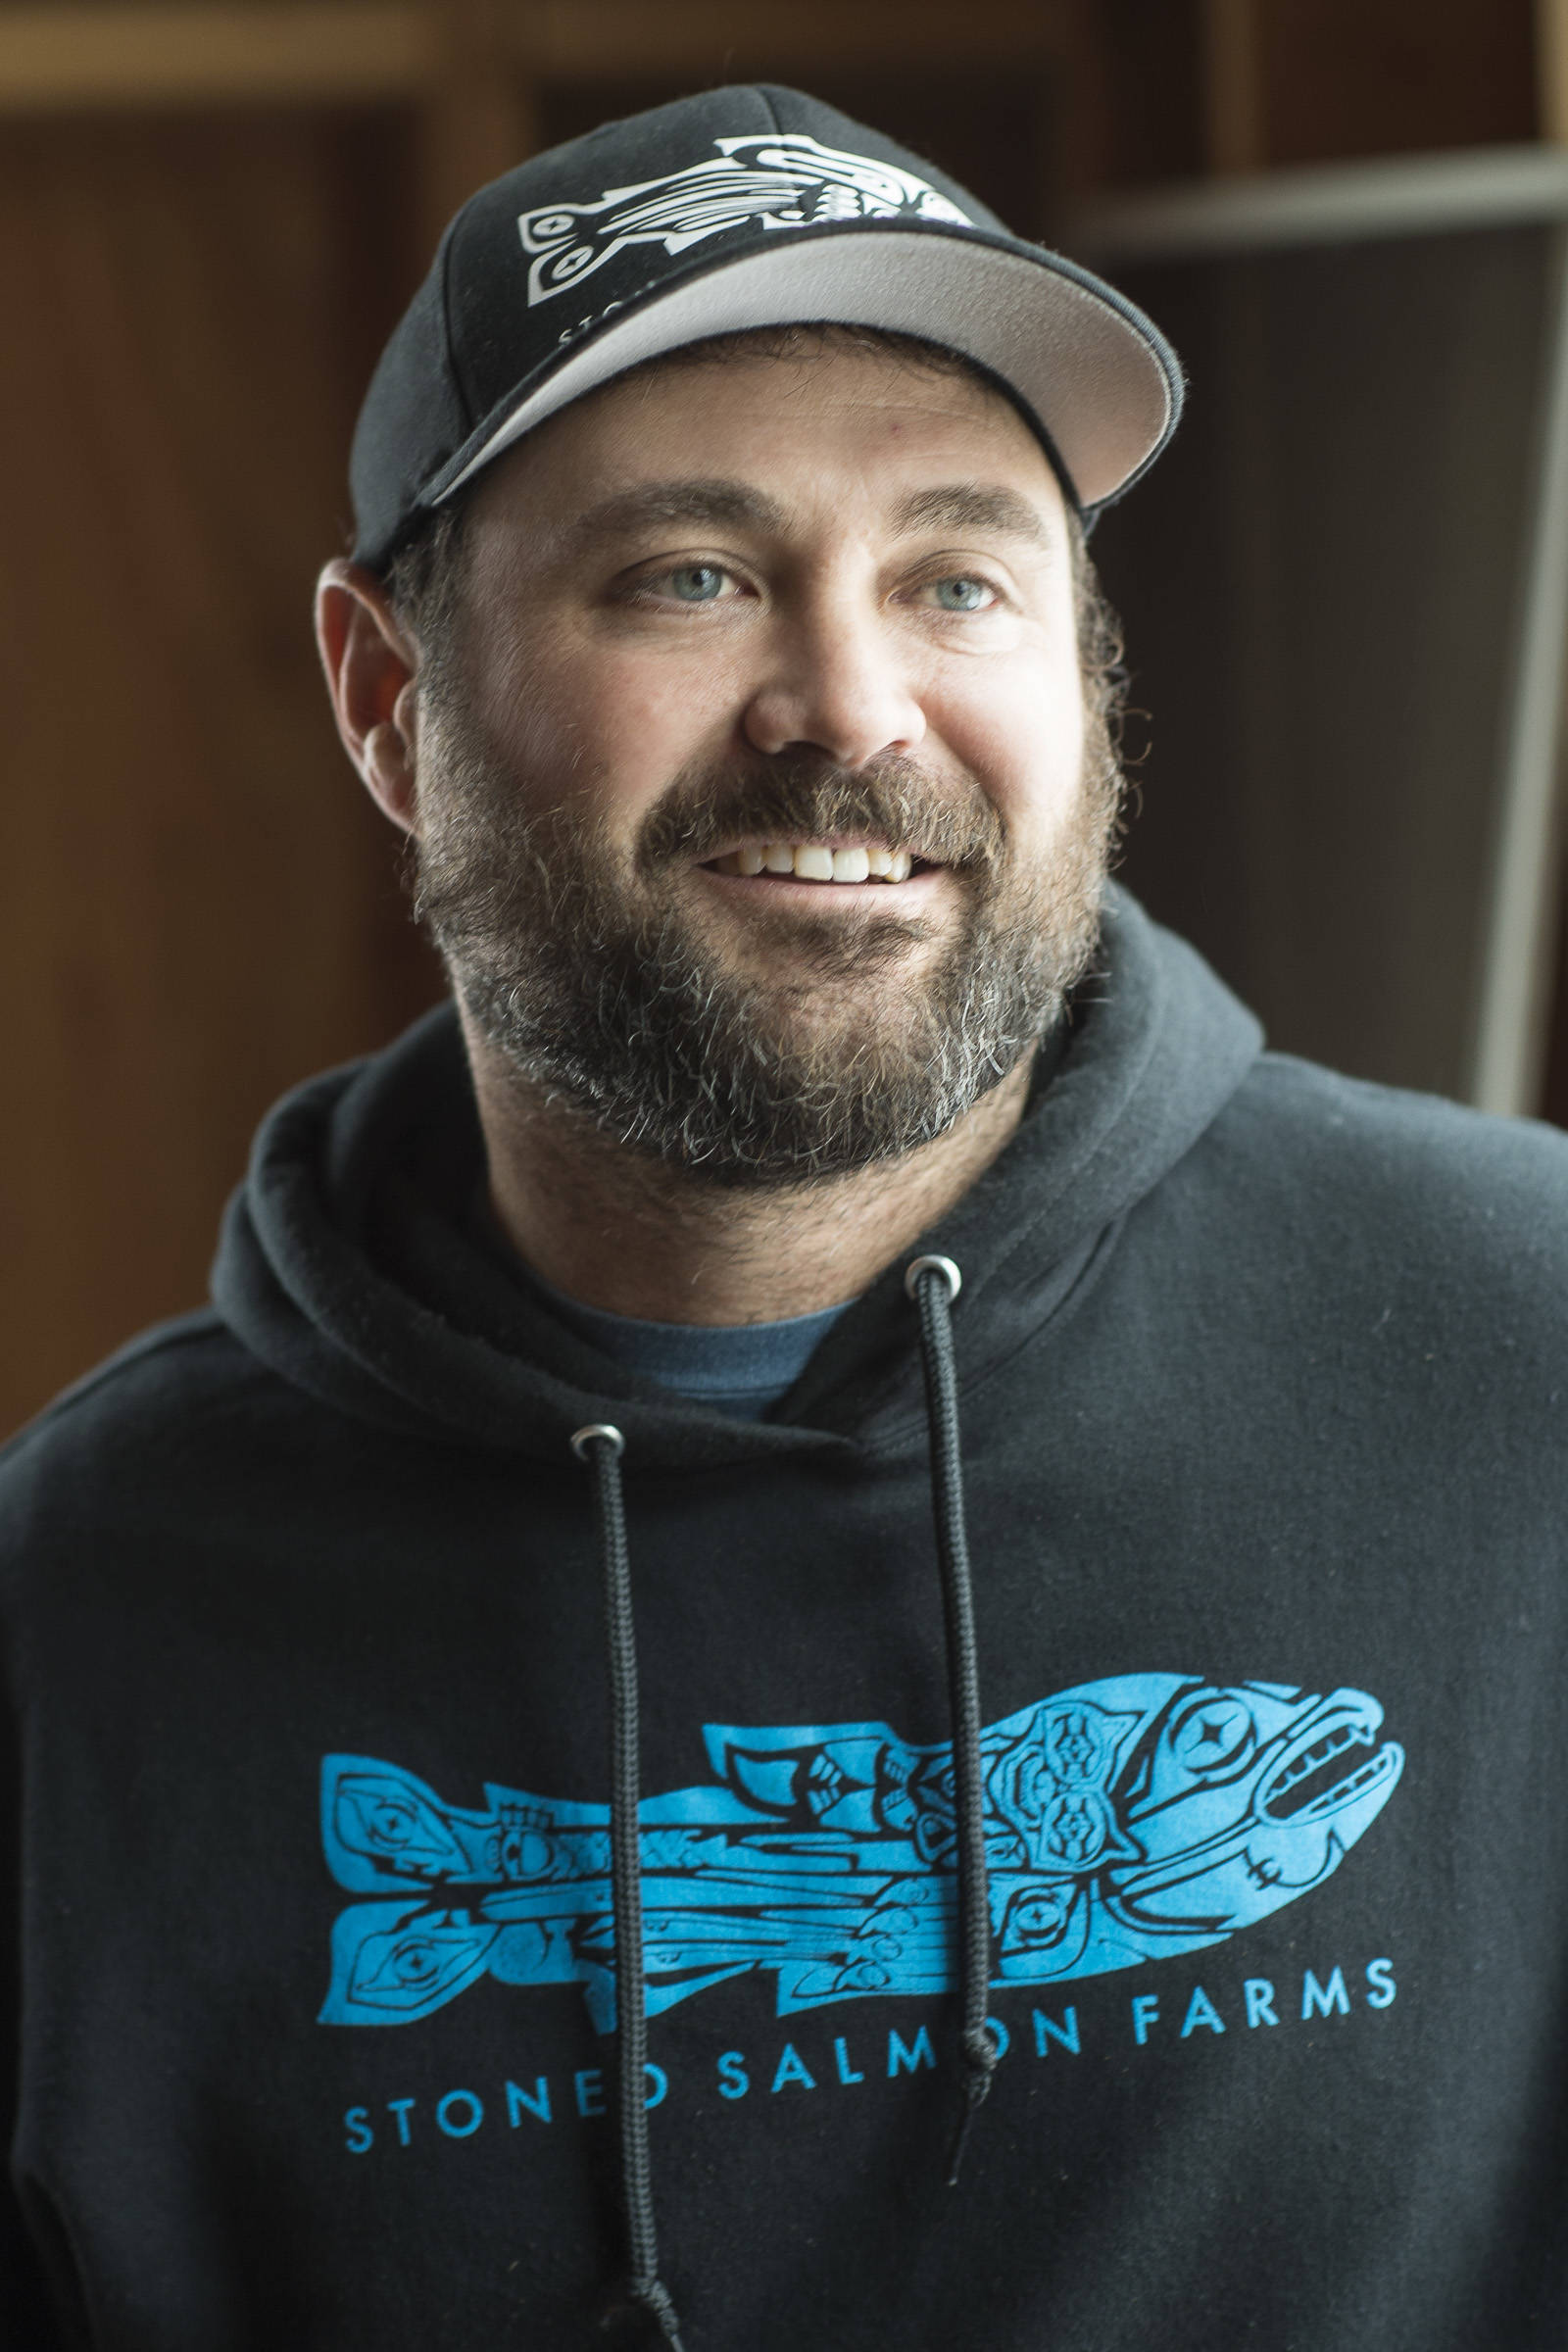 Owner Casey Wilkins talks abou starting up Stoned Salmon Farms and The Alaskan Kush Company in Juneau on Tuesday, Dec. 4, 2018. (Michael Penn | Juneau Empire)